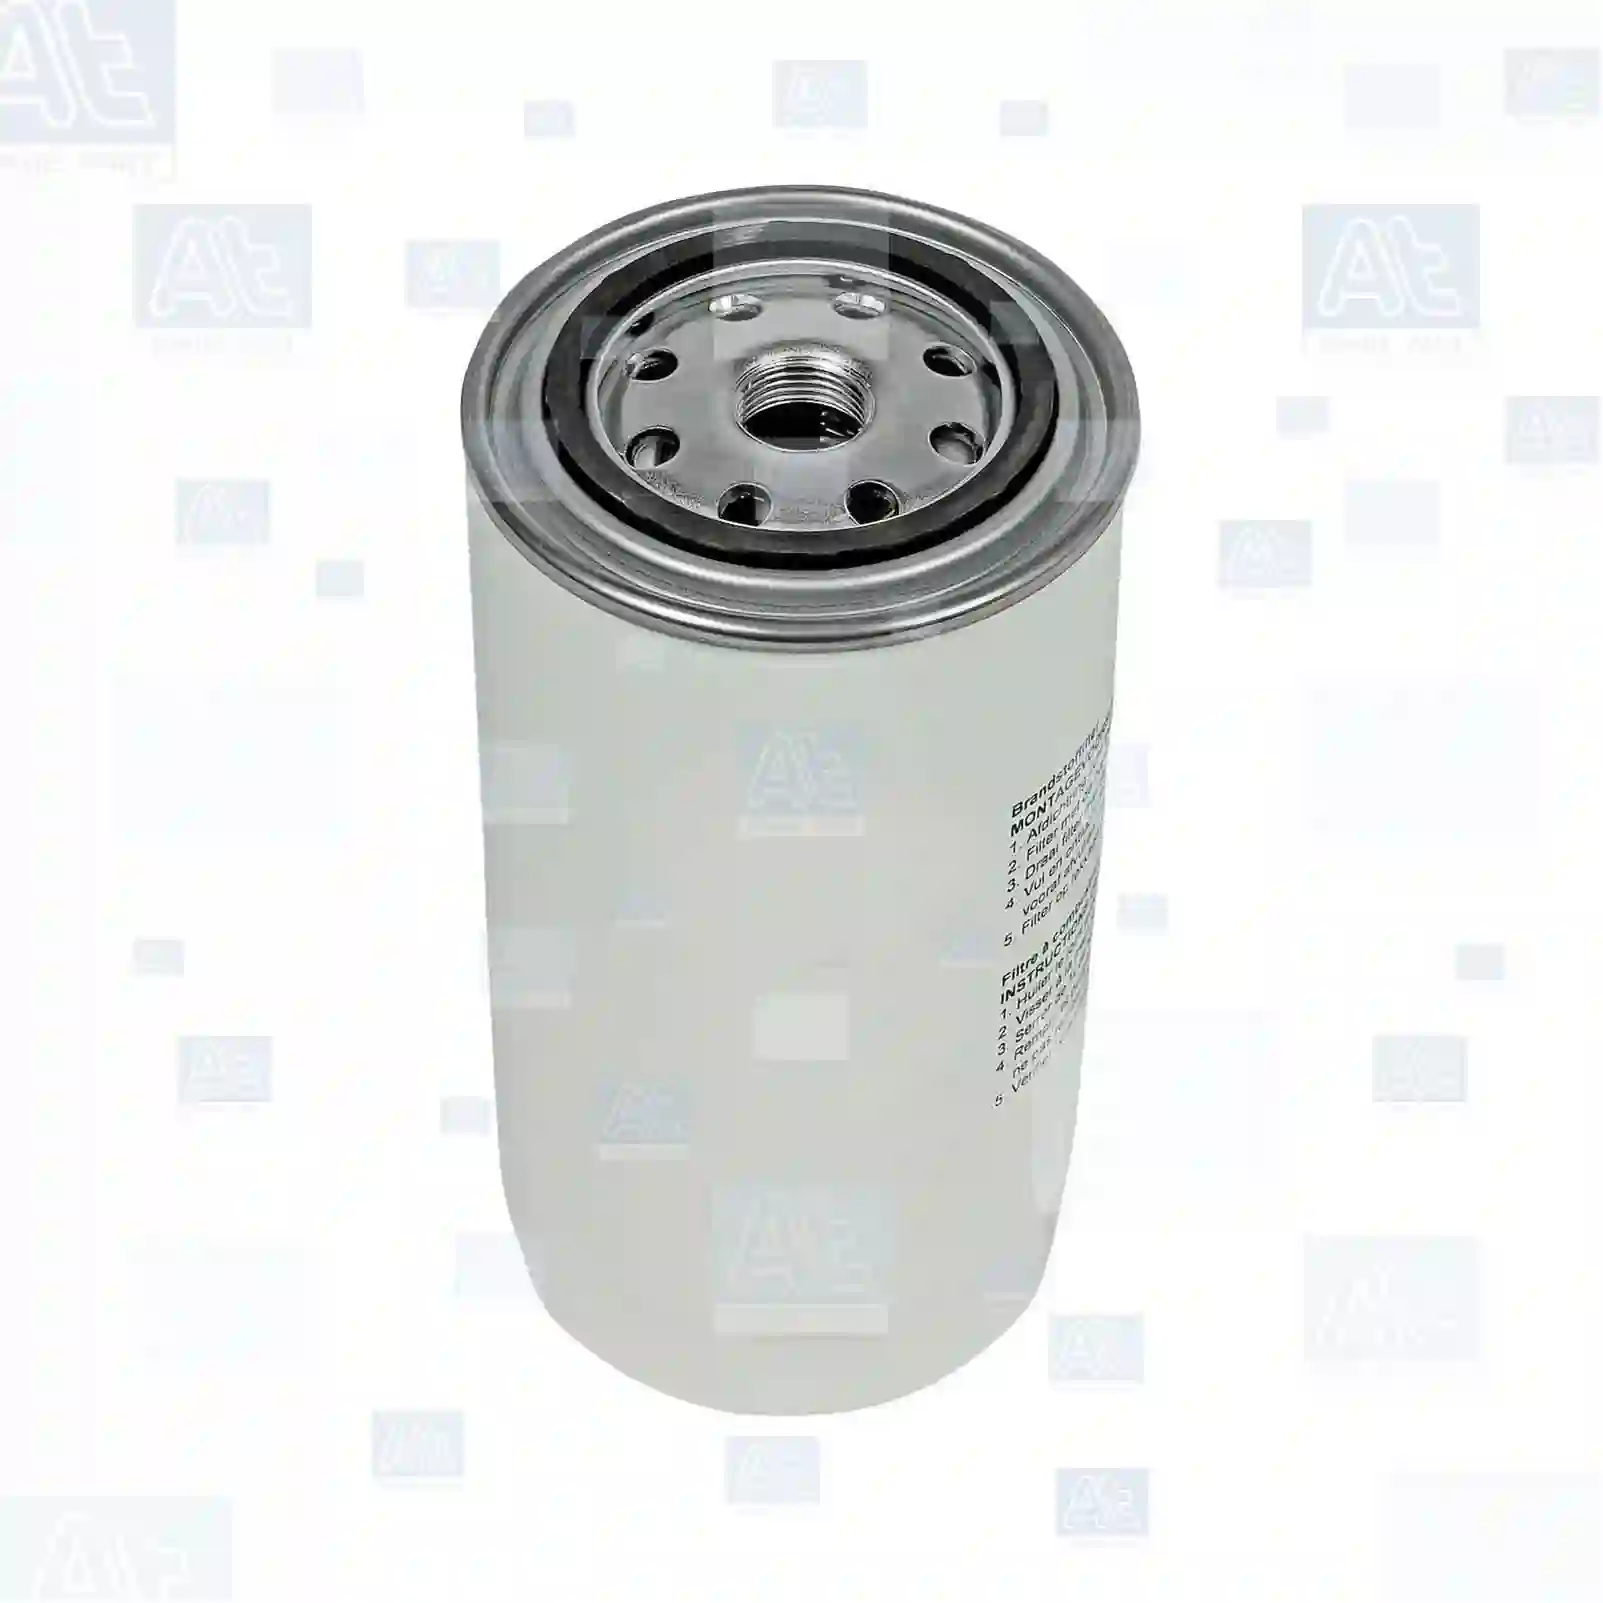 Fuel filter, at no 77723356, oem no: 402030901, 4894548, 4897833, 489783300, Z489783300, 9P916095, 7006269, 84412164, 87803200, 87803208, 3978040, 4894548, 4897833, 4897897, 4989106, FF0542100, 1399760, 1529640, 1705122, 1829166, DP010206, 01399760, 02992241, 04894548, 504033400, BG5X-9155-AA, 9414101755, 02943501, 02943501, 02992241, 2992241, 500039730, 500040957, 503120786, 503621941, 504033400, 504043765, 504292579, 5801729418, 32/925919, 32/925932, 32/926138, 33/3Y7208, RECFF0542100, 0521117010, K1399760PAC, 299008330, 323016450, 711853A1, 323016450, 16400-LA40A, 16401-LA40A, 4894548, 4897897, 87803208, 570107999901, 16400LA40A, 30045440, 14559479, 43919943, 2R0127177B, ZG10133-0008 At Spare Part | Engine, Accelerator Pedal, Camshaft, Connecting Rod, Crankcase, Crankshaft, Cylinder Head, Engine Suspension Mountings, Exhaust Manifold, Exhaust Gas Recirculation, Filter Kits, Flywheel Housing, General Overhaul Kits, Engine, Intake Manifold, Oil Cleaner, Oil Cooler, Oil Filter, Oil Pump, Oil Sump, Piston & Liner, Sensor & Switch, Timing Case, Turbocharger, Cooling System, Belt Tensioner, Coolant Filter, Coolant Pipe, Corrosion Prevention Agent, Drive, Expansion Tank, Fan, Intercooler, Monitors & Gauges, Radiator, Thermostat, V-Belt / Timing belt, Water Pump, Fuel System, Electronical Injector Unit, Feed Pump, Fuel Filter, cpl., Fuel Gauge Sender,  Fuel Line, Fuel Pump, Fuel Tank, Injection Line Kit, Injection Pump, Exhaust System, Clutch & Pedal, Gearbox, Propeller Shaft, Axles, Brake System, Hubs & Wheels, Suspension, Leaf Spring, Universal Parts / Accessories, Steering, Electrical System, Cabin Fuel filter, at no 77723356, oem no: 402030901, 4894548, 4897833, 489783300, Z489783300, 9P916095, 7006269, 84412164, 87803200, 87803208, 3978040, 4894548, 4897833, 4897897, 4989106, FF0542100, 1399760, 1529640, 1705122, 1829166, DP010206, 01399760, 02992241, 04894548, 504033400, BG5X-9155-AA, 9414101755, 02943501, 02943501, 02992241, 2992241, 500039730, 500040957, 503120786, 503621941, 504033400, 504043765, 504292579, 5801729418, 32/925919, 32/925932, 32/926138, 33/3Y7208, RECFF0542100, 0521117010, K1399760PAC, 299008330, 323016450, 711853A1, 323016450, 16400-LA40A, 16401-LA40A, 4894548, 4897897, 87803208, 570107999901, 16400LA40A, 30045440, 14559479, 43919943, 2R0127177B, ZG10133-0008 At Spare Part | Engine, Accelerator Pedal, Camshaft, Connecting Rod, Crankcase, Crankshaft, Cylinder Head, Engine Suspension Mountings, Exhaust Manifold, Exhaust Gas Recirculation, Filter Kits, Flywheel Housing, General Overhaul Kits, Engine, Intake Manifold, Oil Cleaner, Oil Cooler, Oil Filter, Oil Pump, Oil Sump, Piston & Liner, Sensor & Switch, Timing Case, Turbocharger, Cooling System, Belt Tensioner, Coolant Filter, Coolant Pipe, Corrosion Prevention Agent, Drive, Expansion Tank, Fan, Intercooler, Monitors & Gauges, Radiator, Thermostat, V-Belt / Timing belt, Water Pump, Fuel System, Electronical Injector Unit, Feed Pump, Fuel Filter, cpl., Fuel Gauge Sender,  Fuel Line, Fuel Pump, Fuel Tank, Injection Line Kit, Injection Pump, Exhaust System, Clutch & Pedal, Gearbox, Propeller Shaft, Axles, Brake System, Hubs & Wheels, Suspension, Leaf Spring, Universal Parts / Accessories, Steering, Electrical System, Cabin